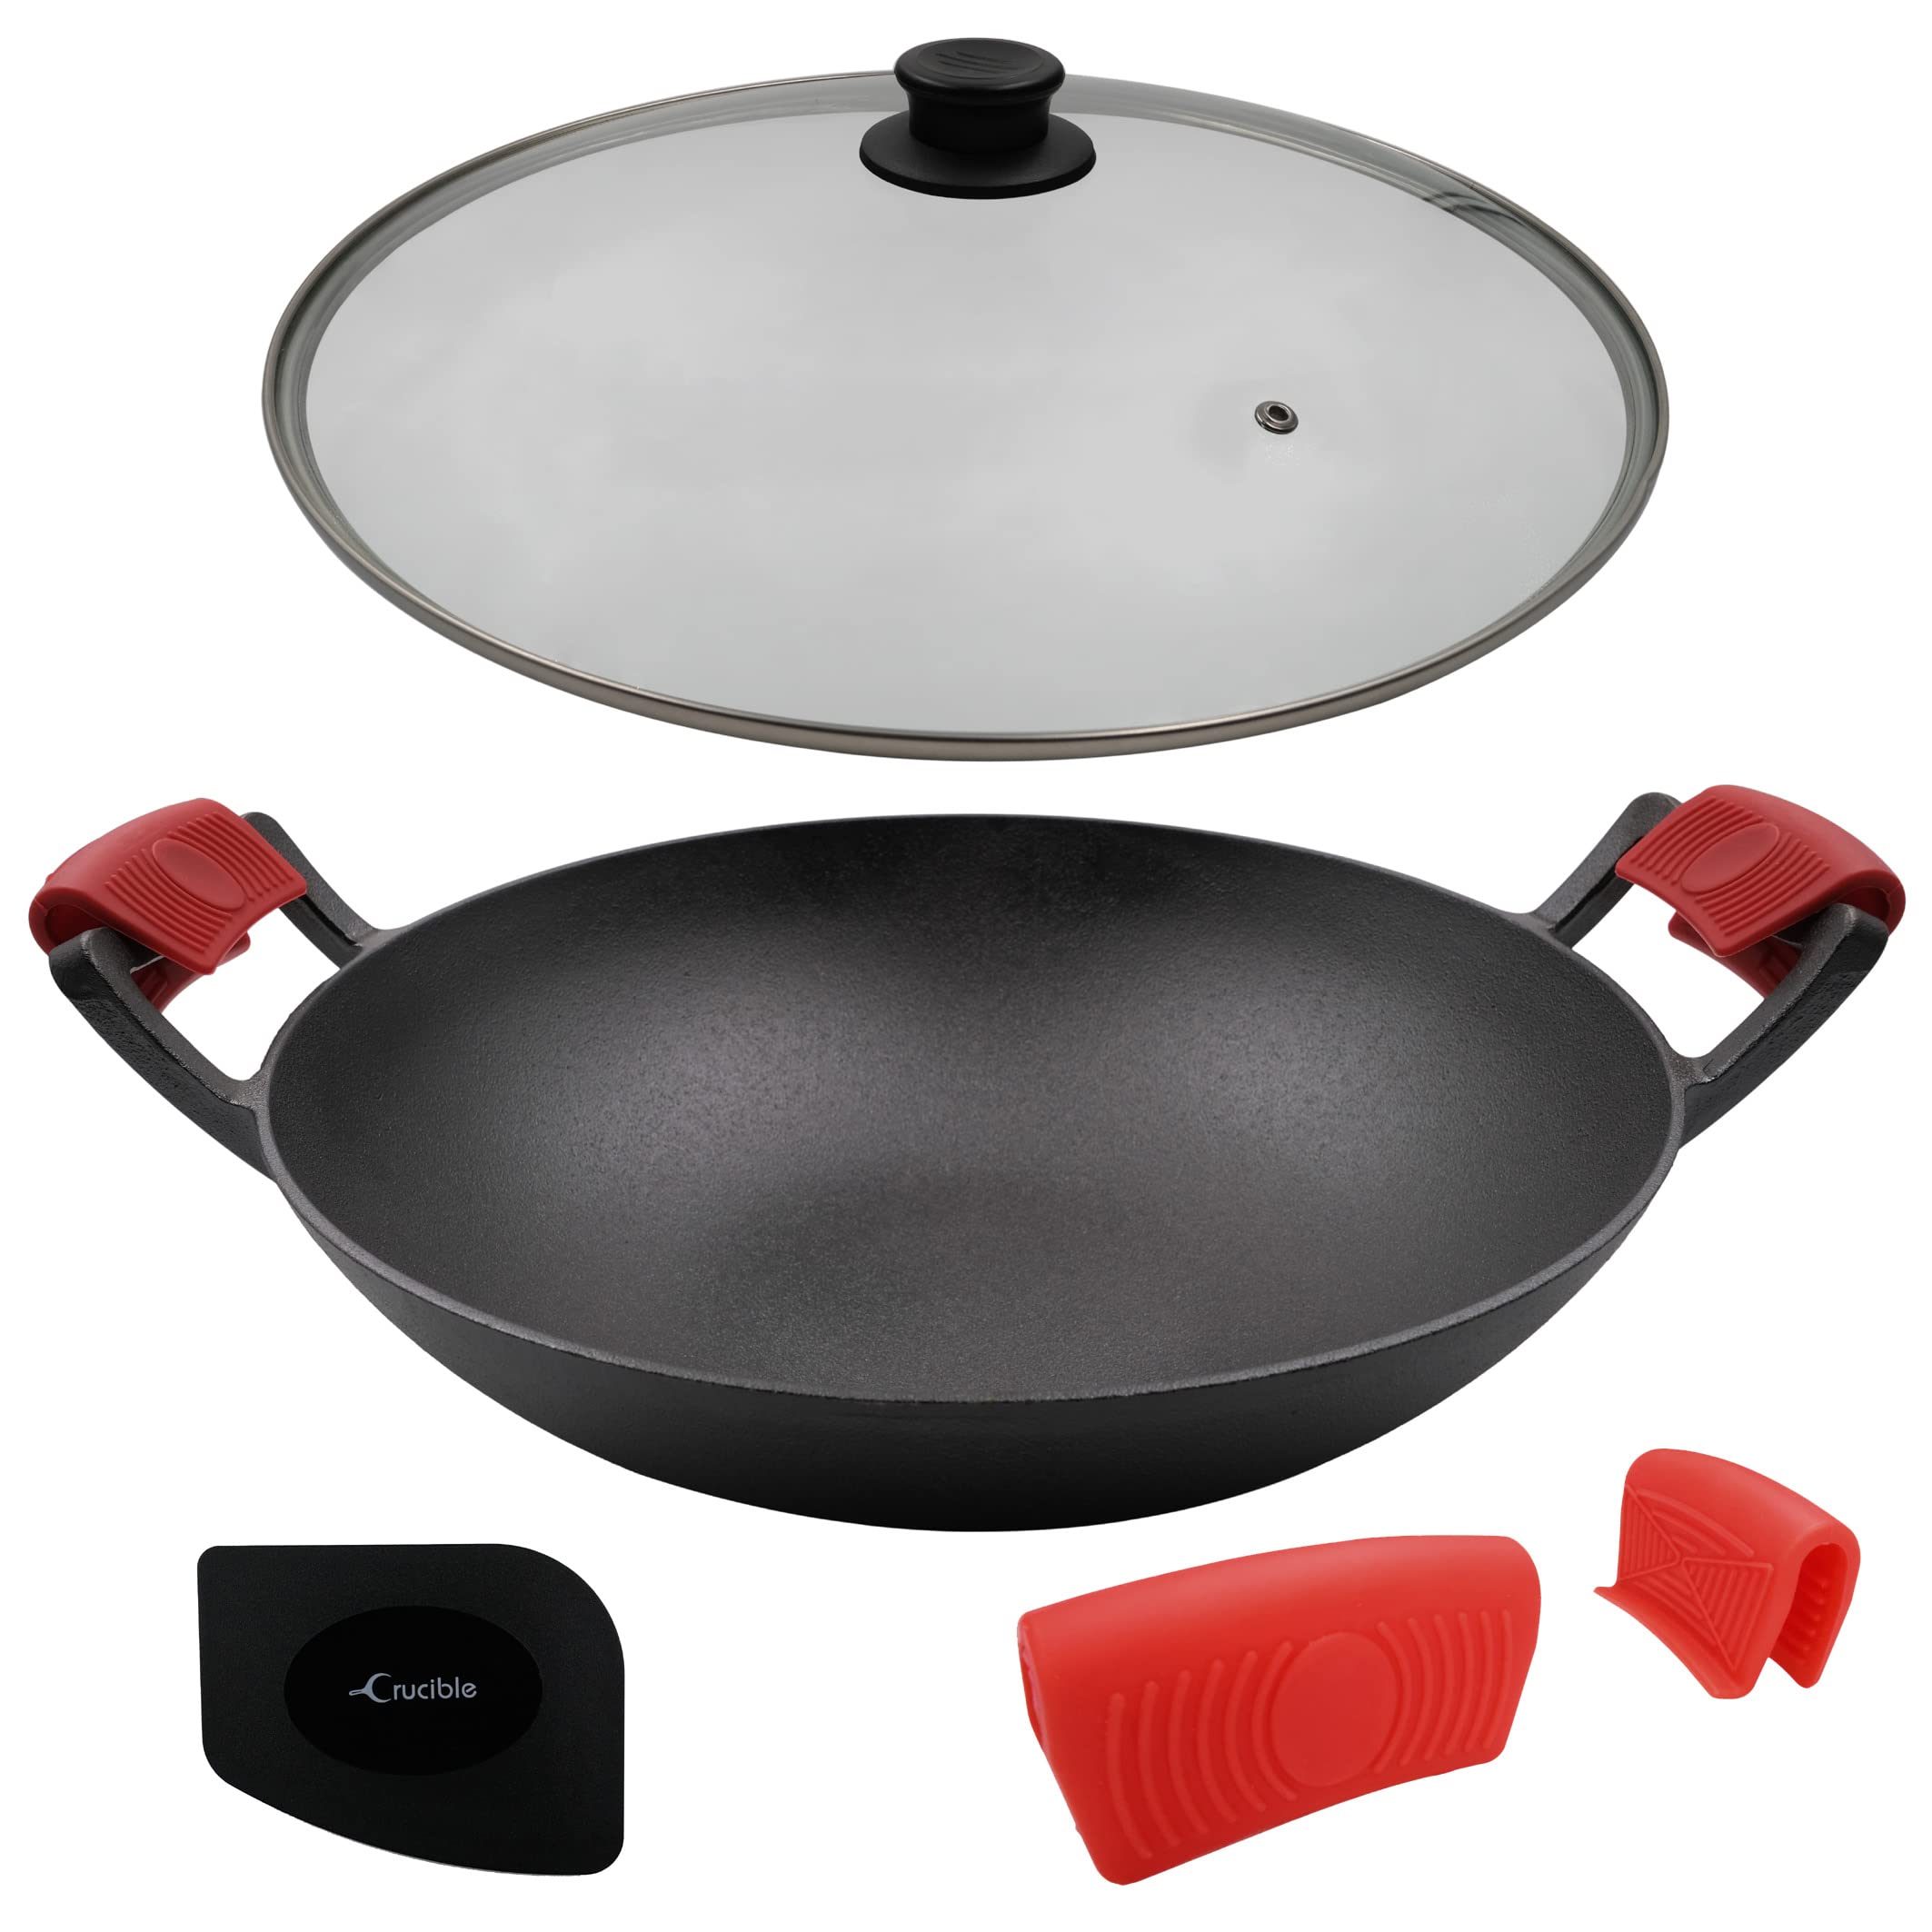 Crucible cookware 14-Inch cast Iron Wok Set (Pre-Seasoned), glass Lid & Silicone Hot Handle Holders